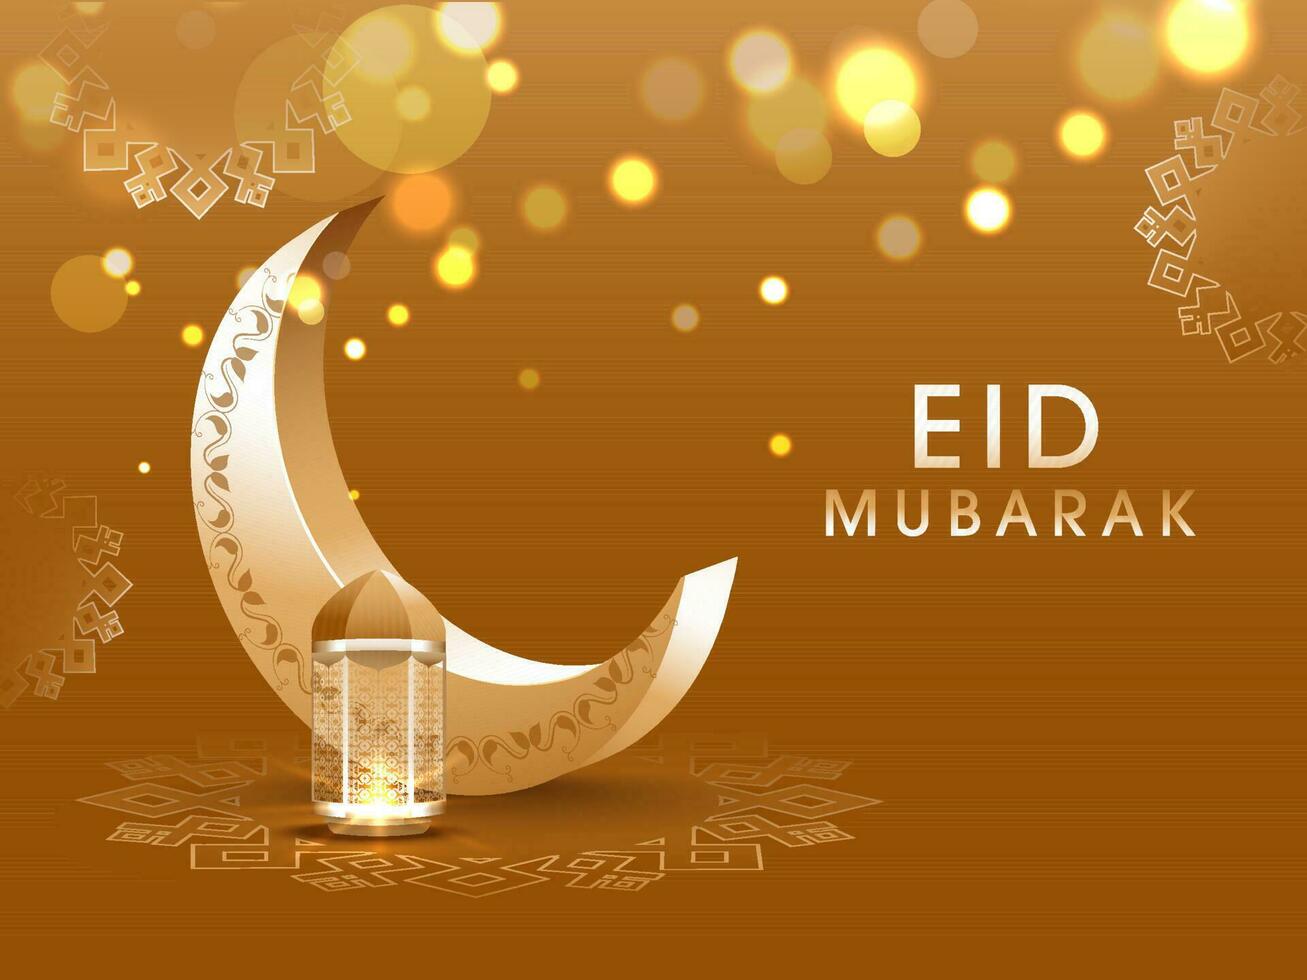 Golden 3d crescent moon and illuminated lanterns on bokeh light decorated brown background for Isalmic festival Eid Mubarak celebration background. vector